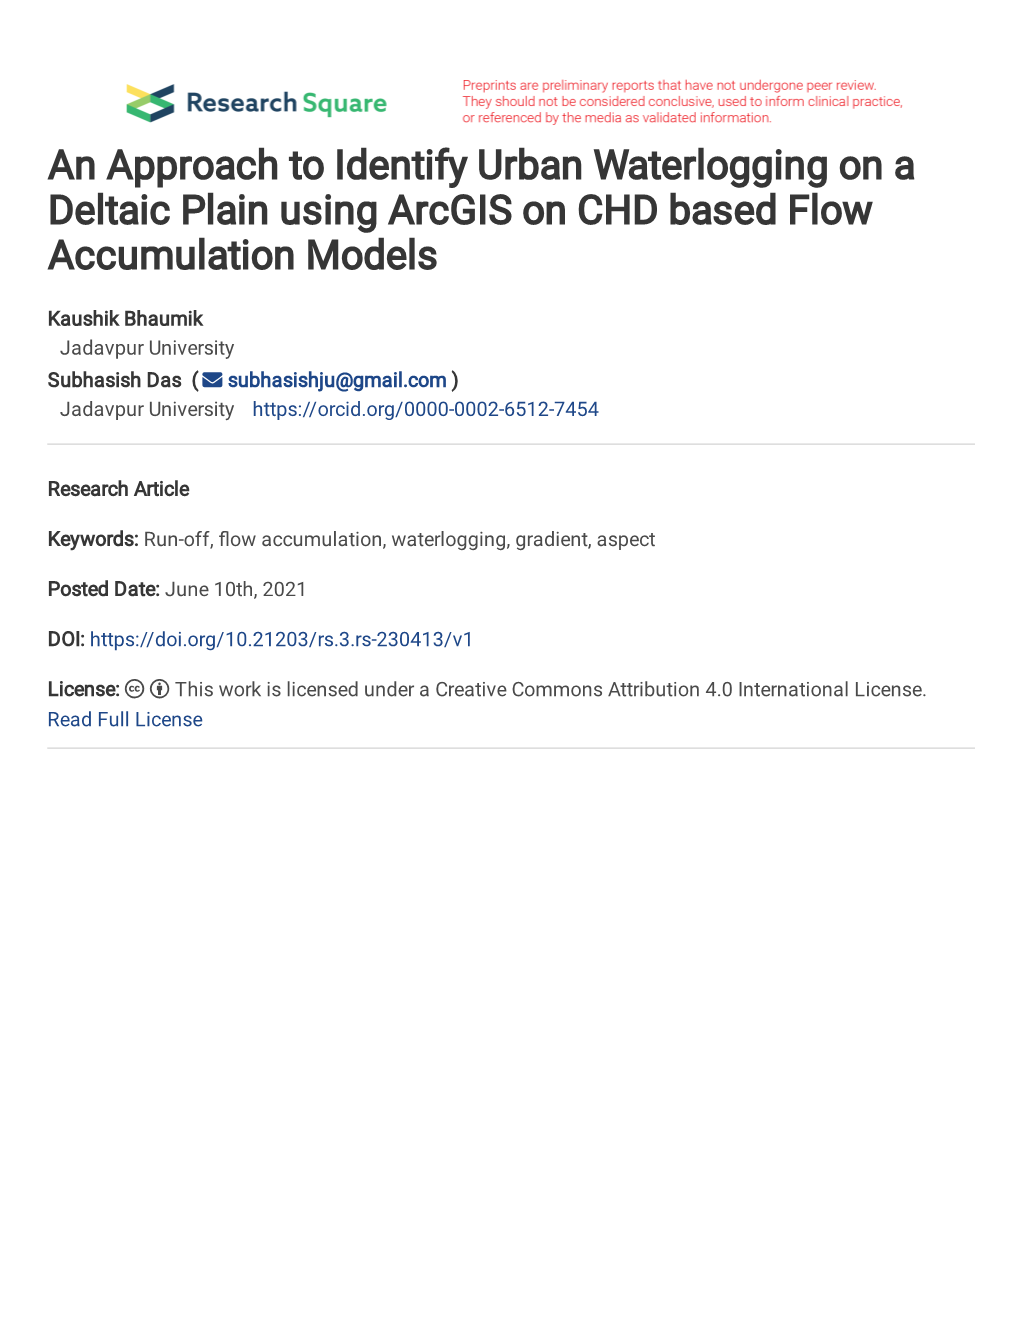 An Approach to Identify Urban Waterlogging on a Deltaic Plain Using Arcgis on CHD Based Flow Accumulation Models